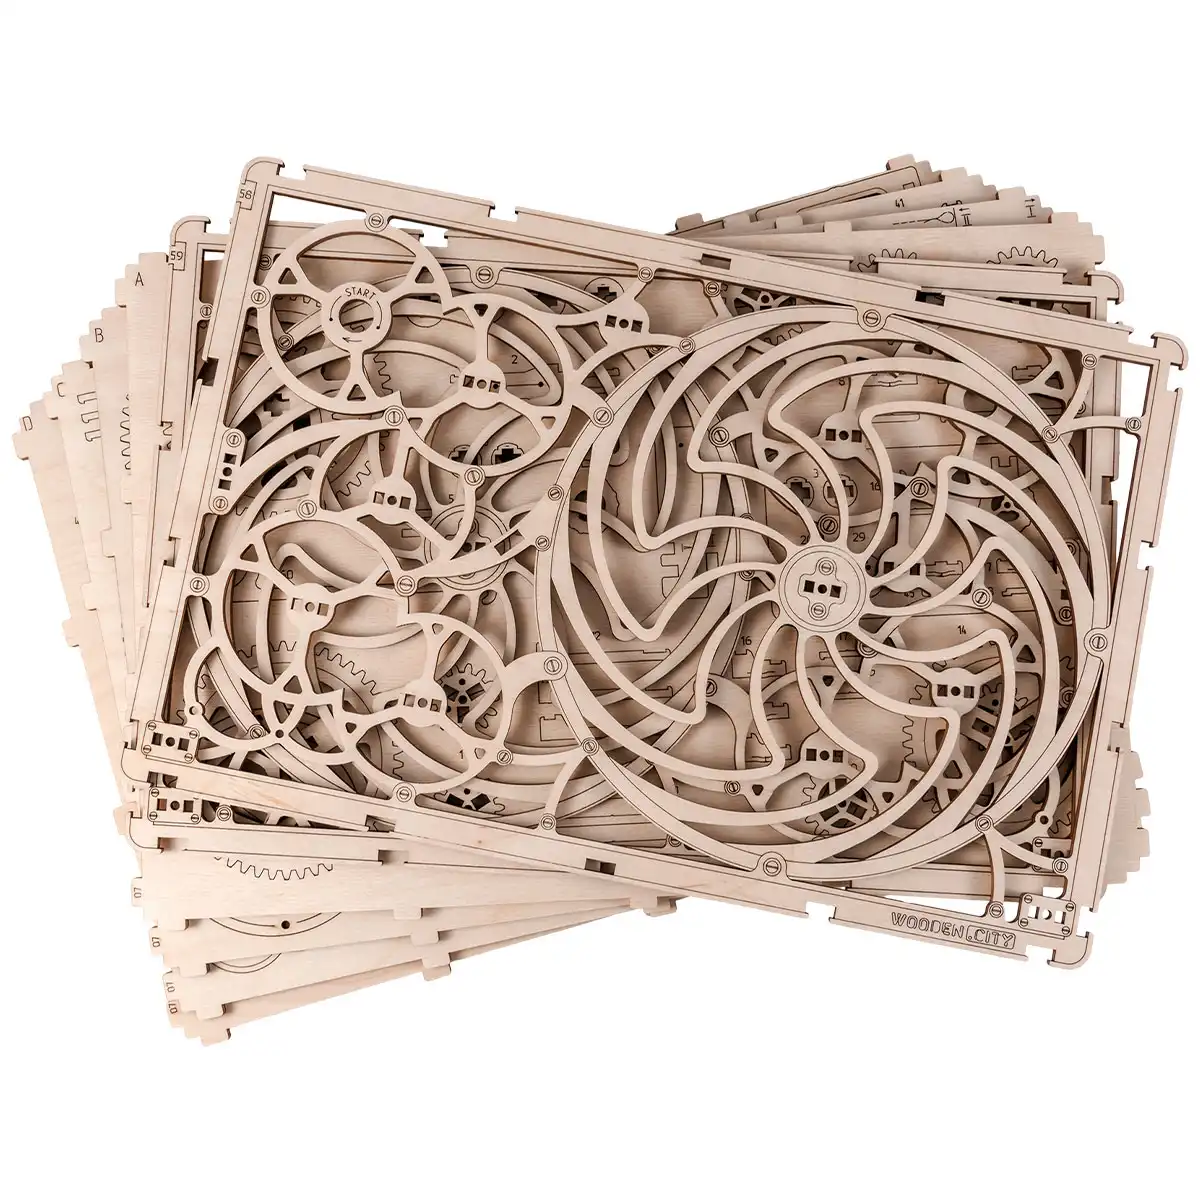 3D Wooden Decaration Puzzle - Kinetic Picture | Wooden.City